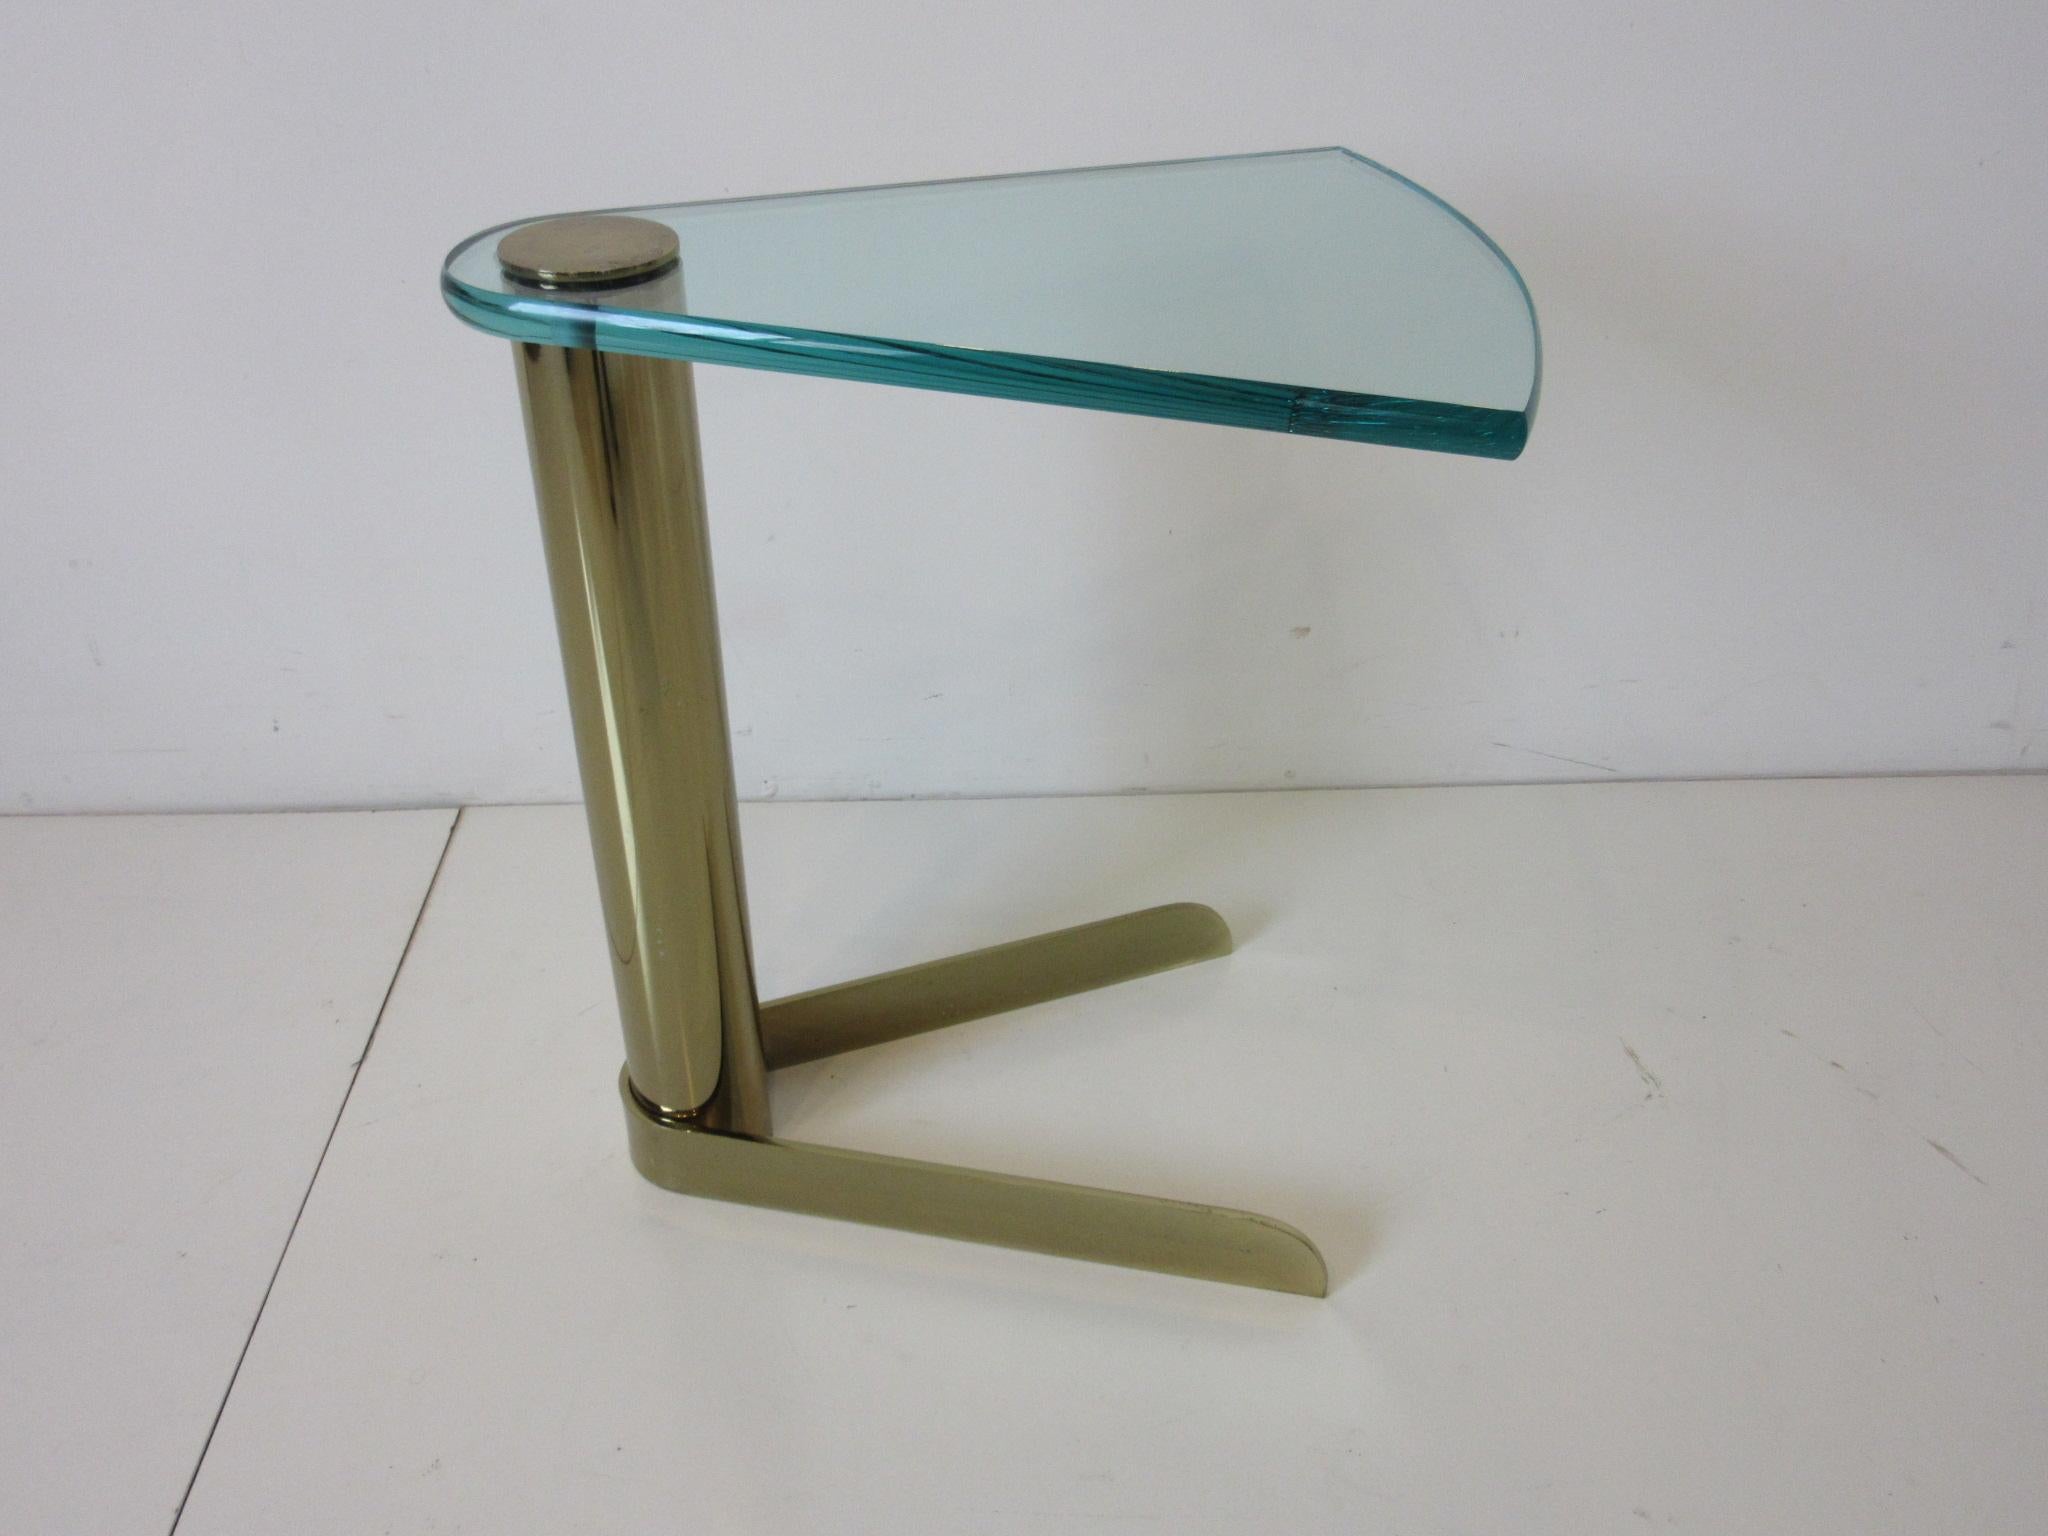 A very well crafted, fine and rare brass and plate glass Wedge side or cocktail table designed by Leon Pace. This elegantly designed modern side table fits with a comfortable lounge or club chair having just the right size, glam and richness that